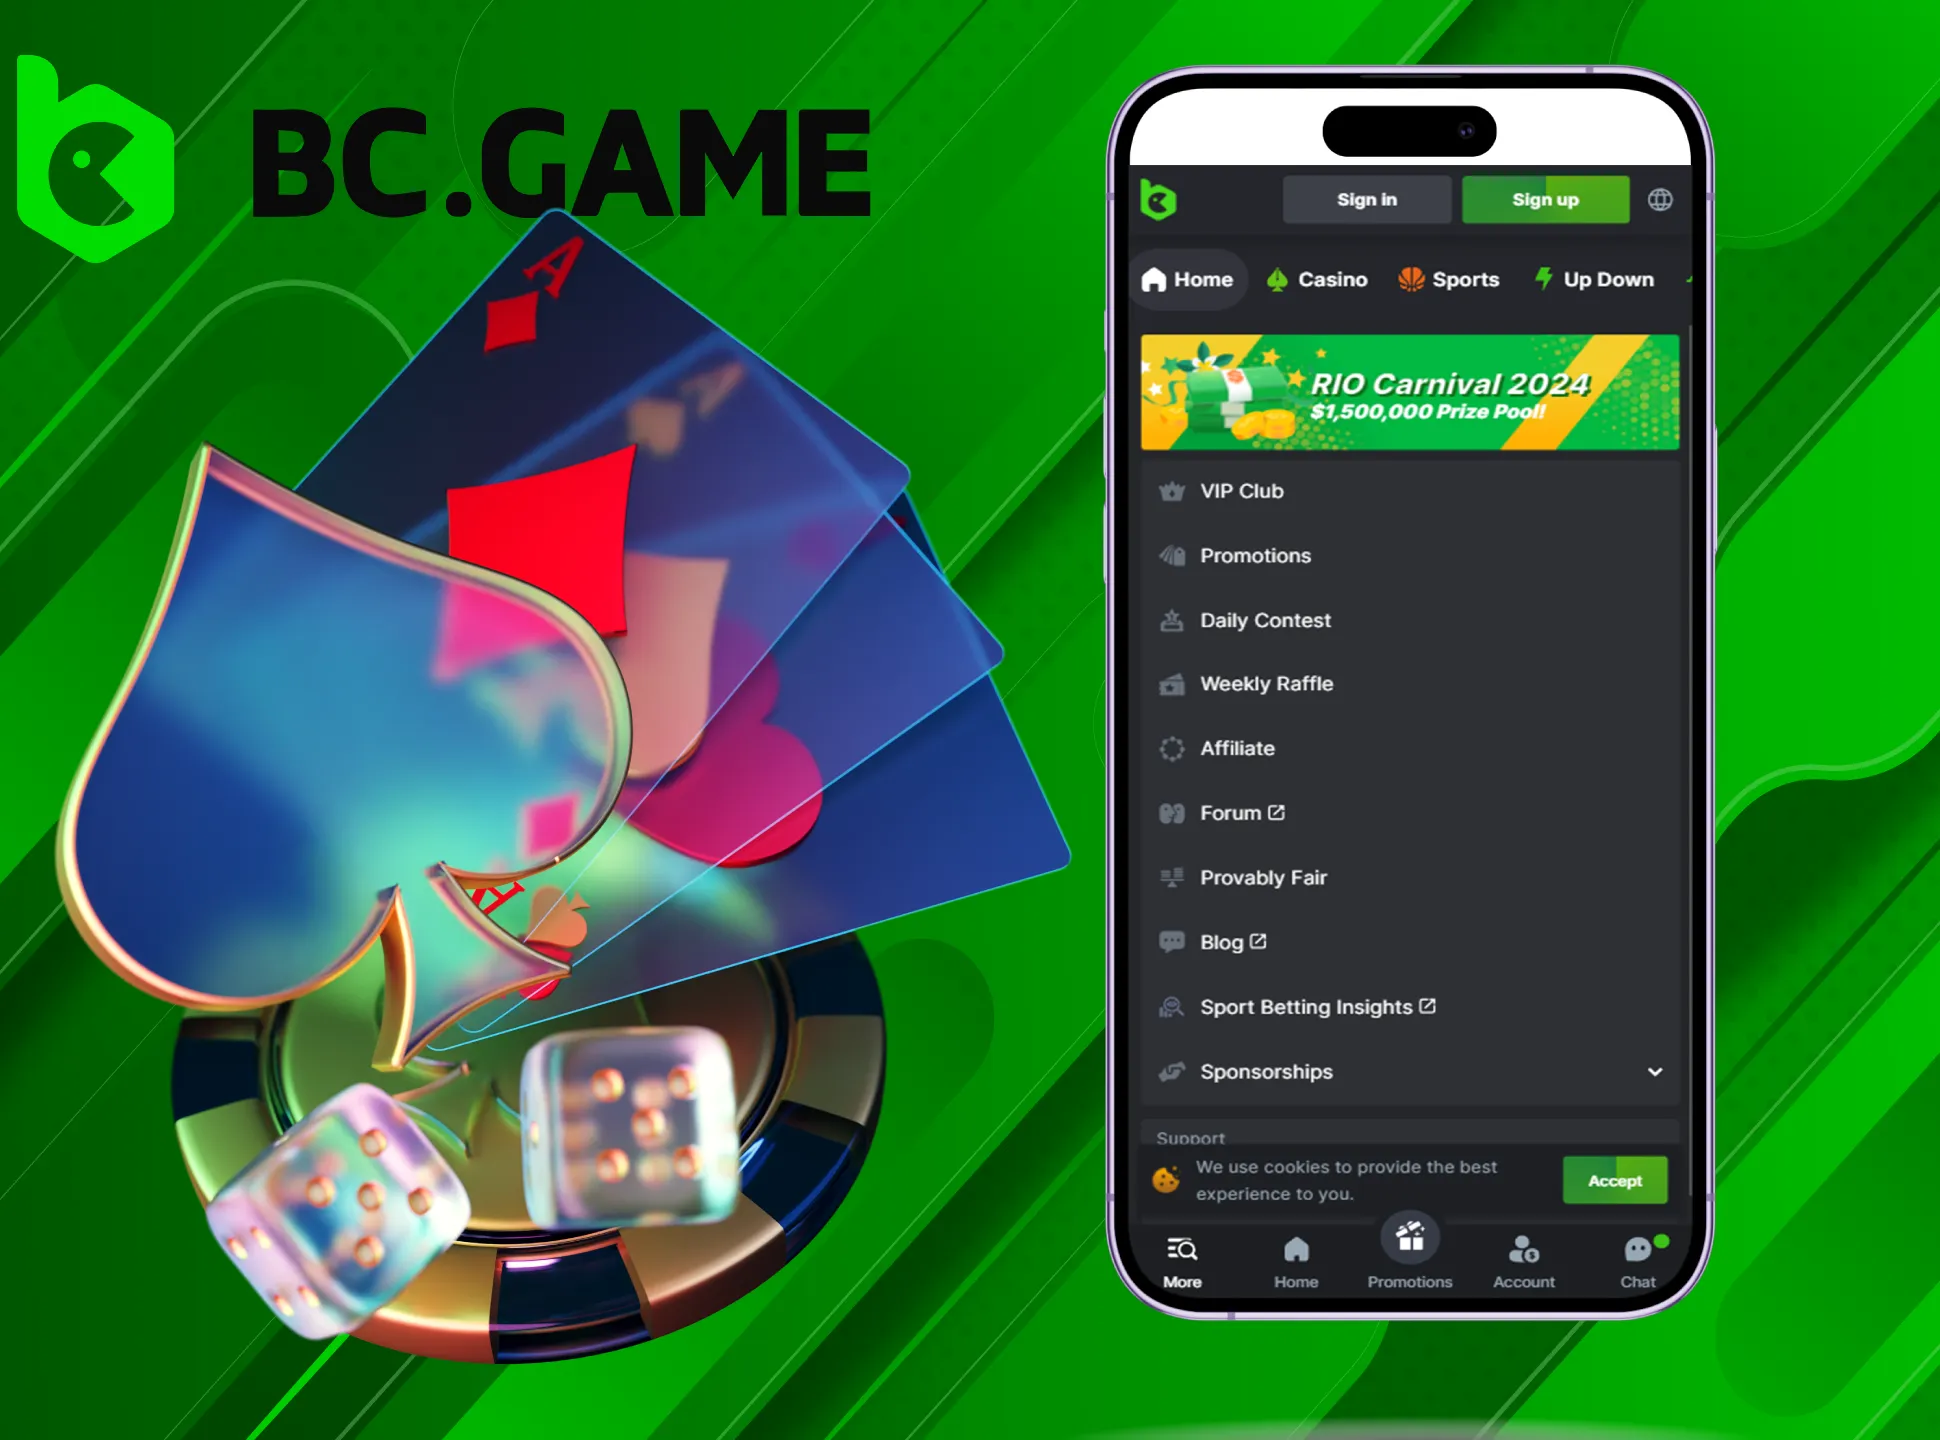 The mobile app gives you quick access to BC Game casino betting and games.